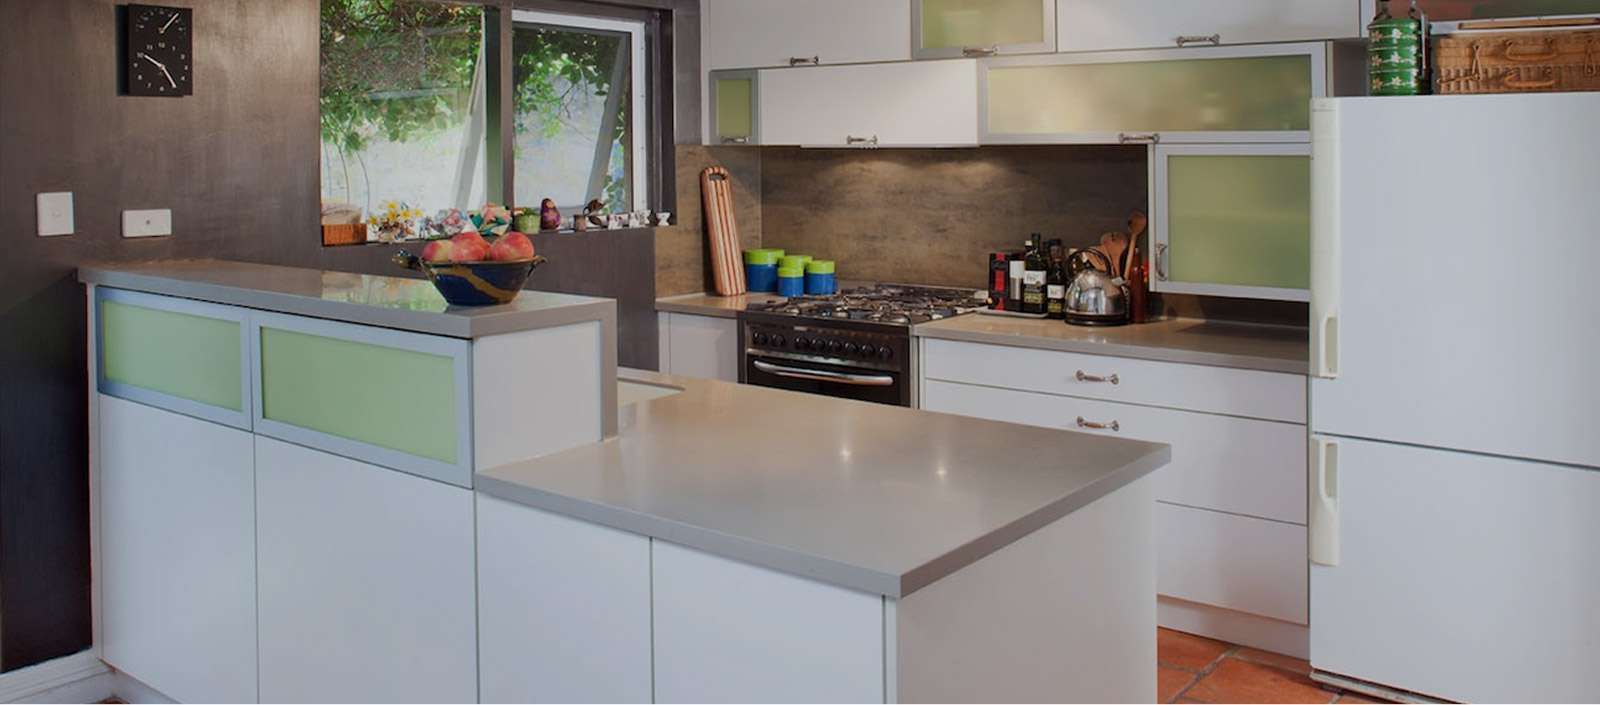 Most Durable Materials For Kitchen Counters